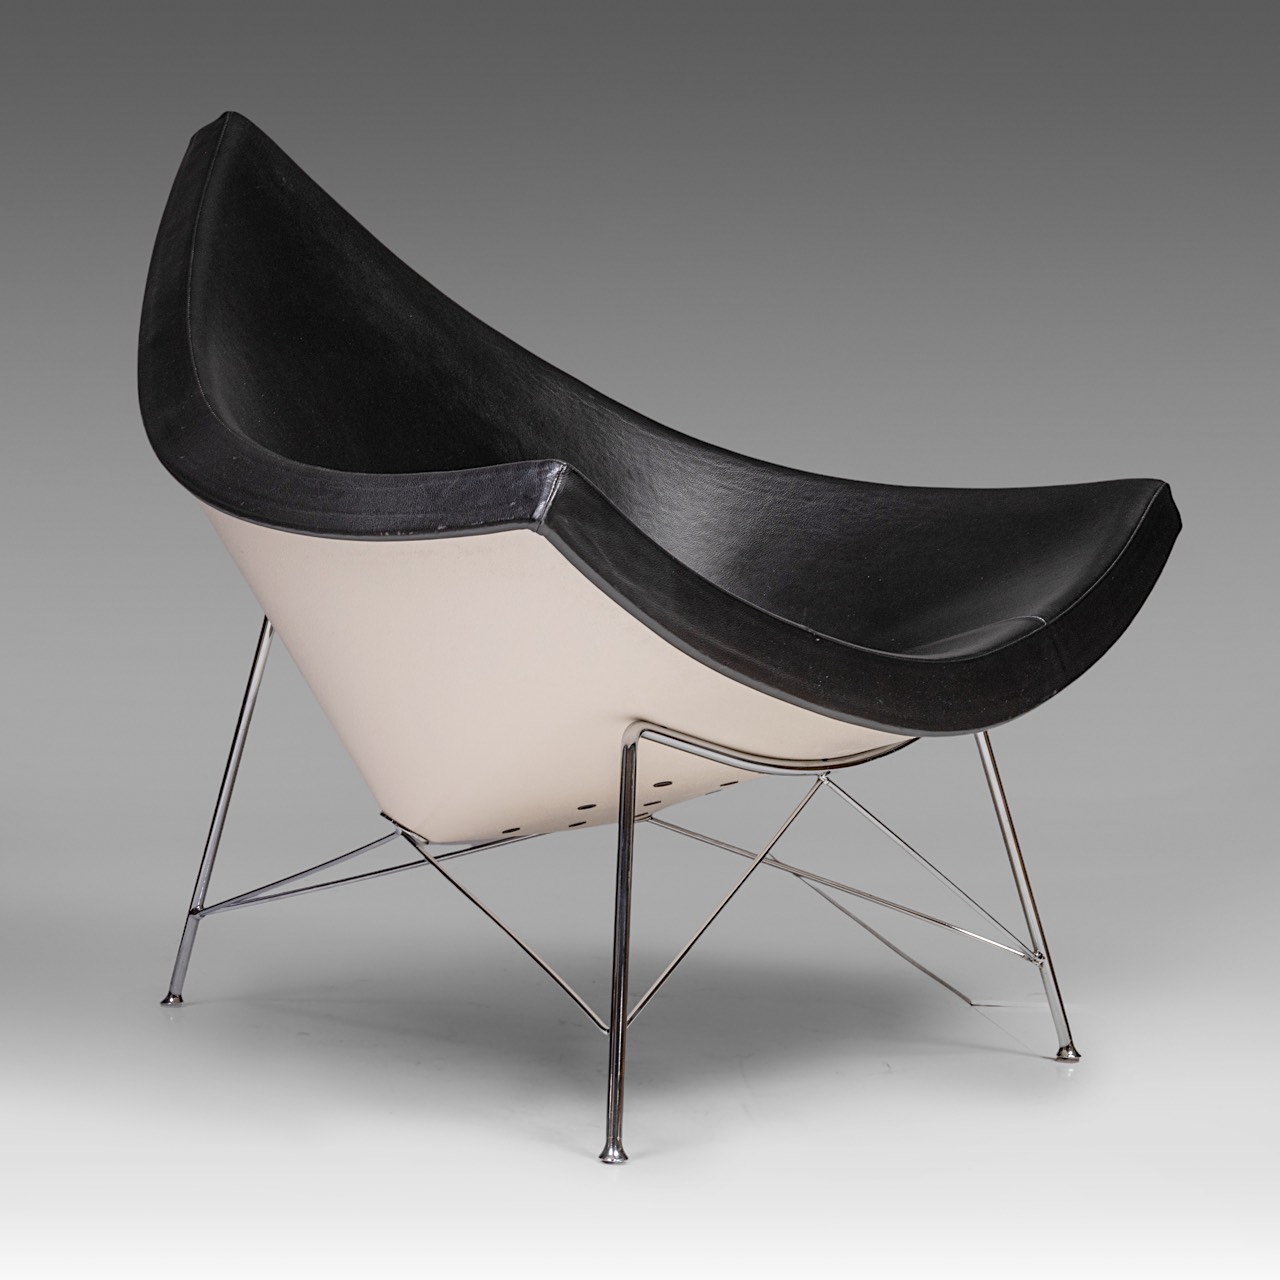 Coconut chair by George Nelson for Vitra, H 105 - W 82 cm - Image 2 of 10